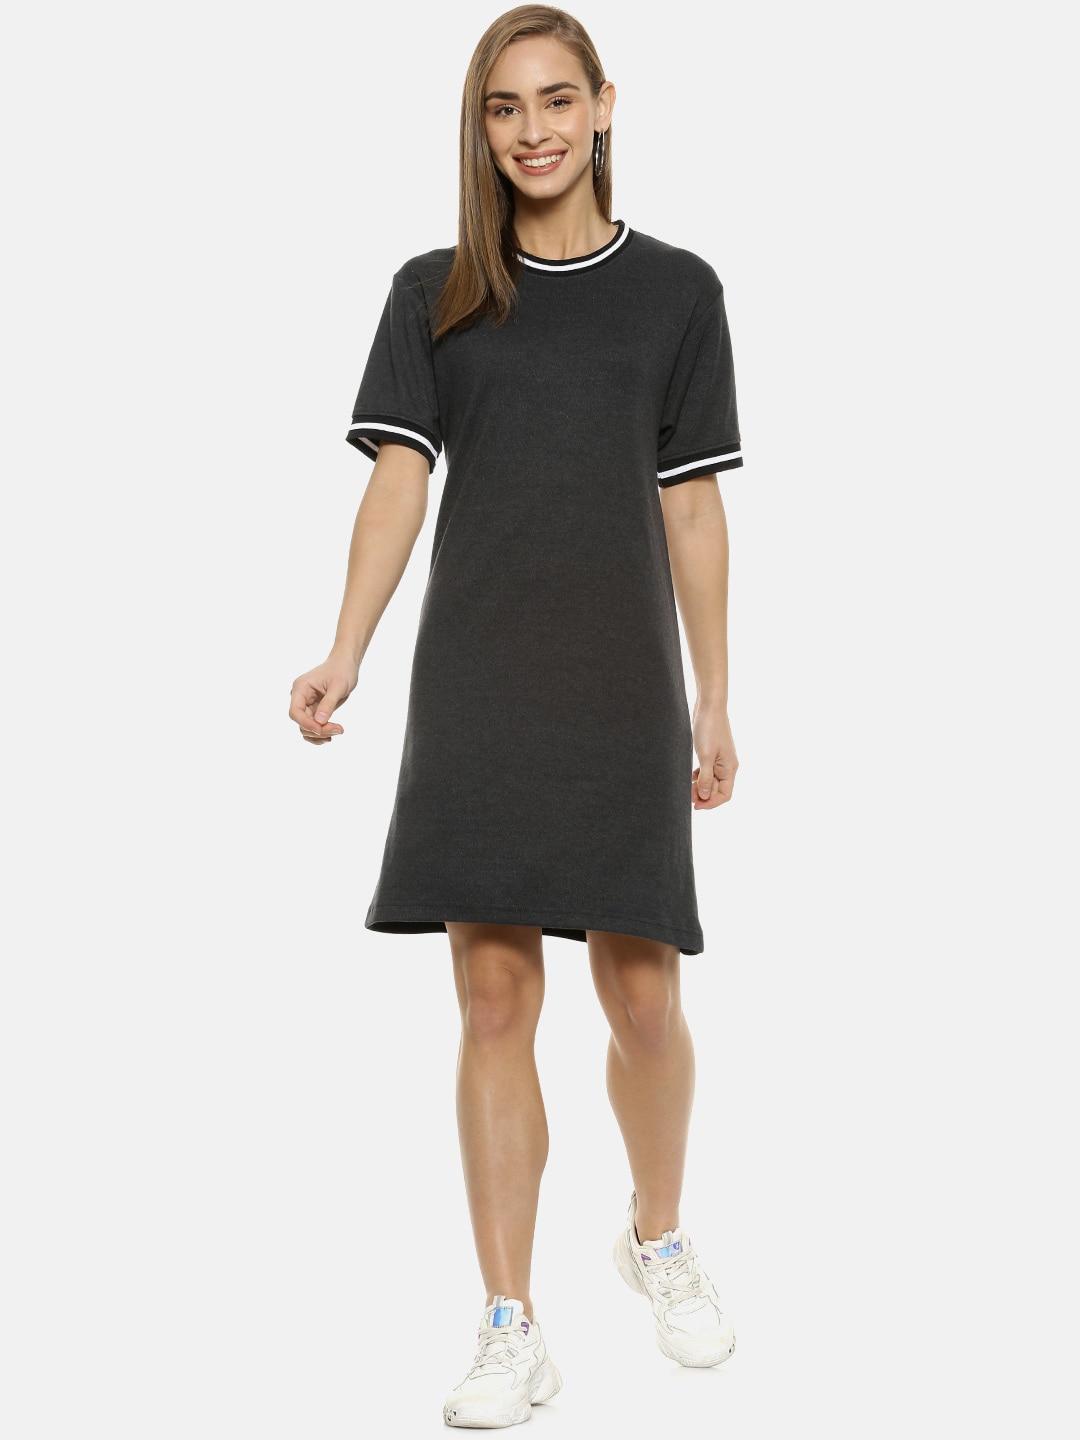 Campus Sutra Charcoal Grey Solid Knitted Cotton T-shirt Dress